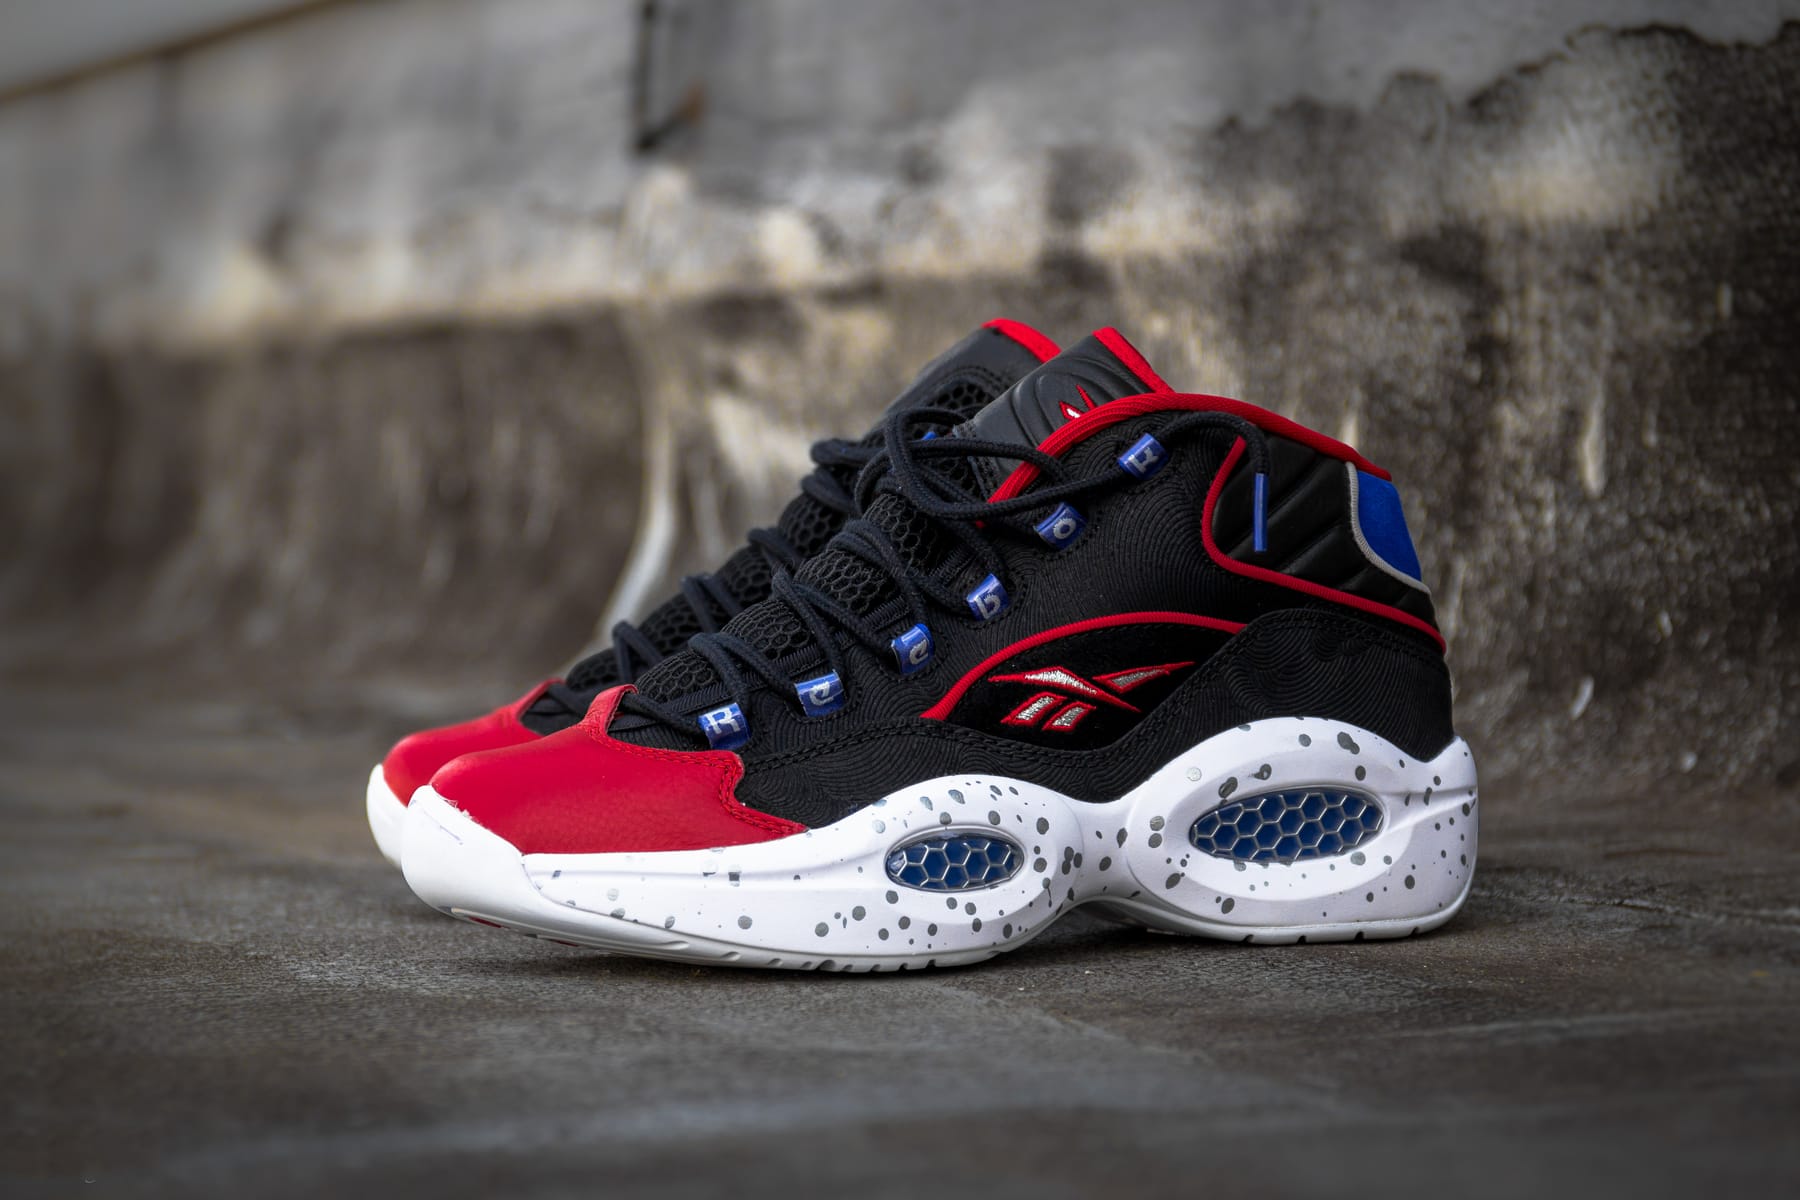 reebok the question colorways - 59% OFF 